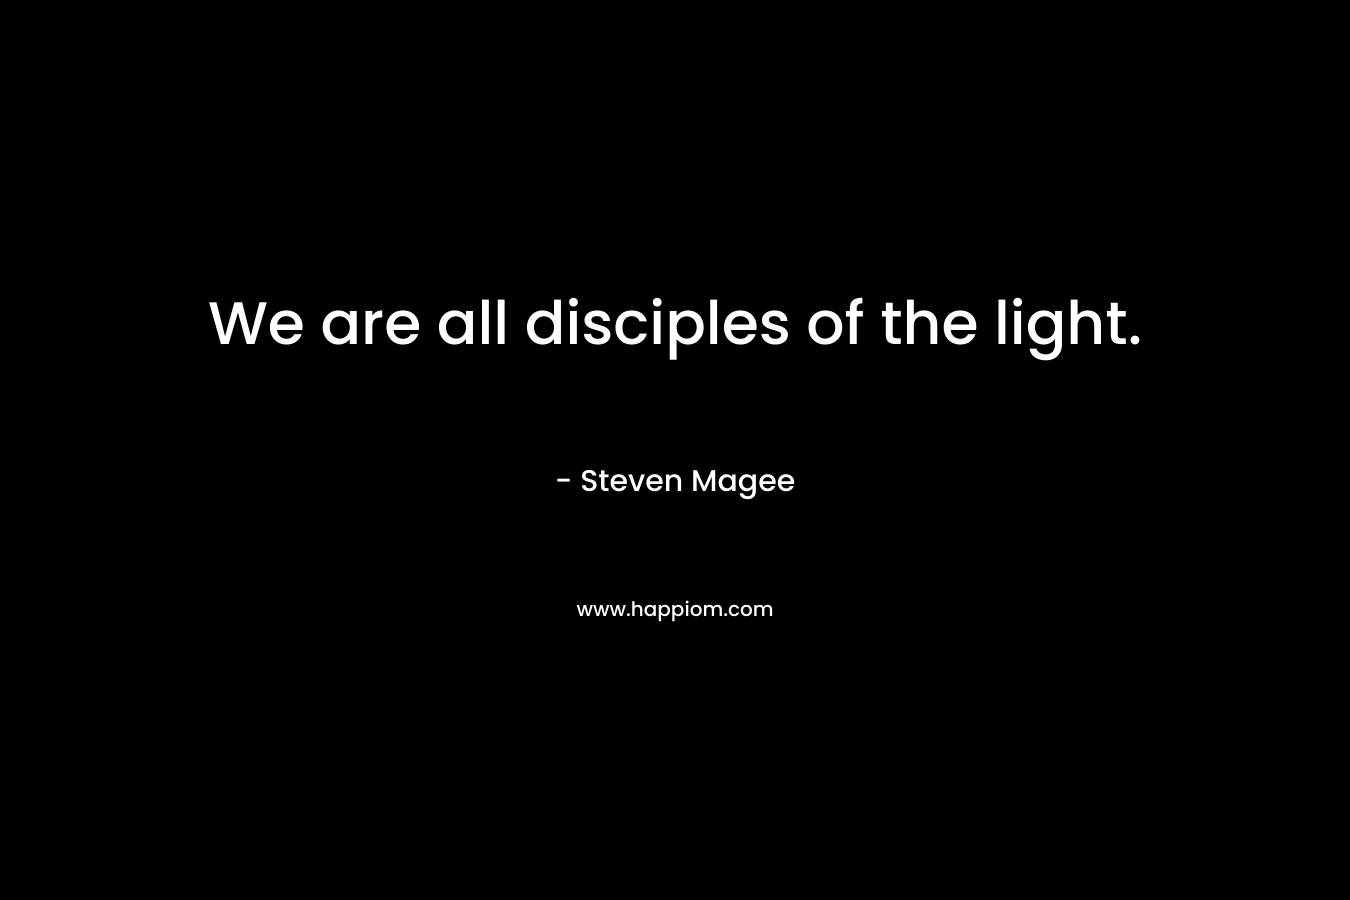 We are all disciples of the light. – Steven Magee